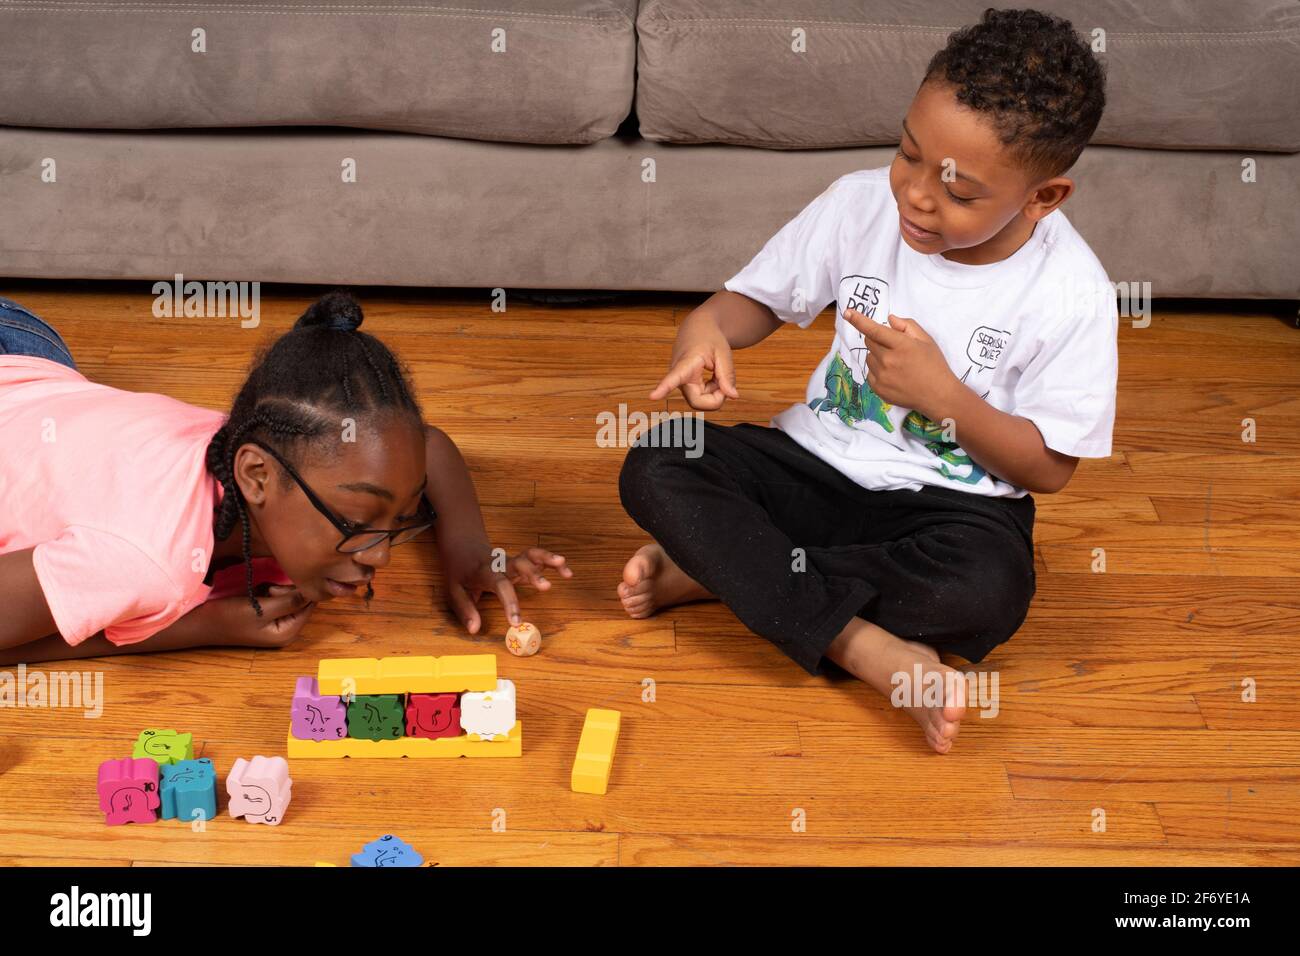 Girl, age 11, playing game with blocks with her 6 year old brother Stock Photo